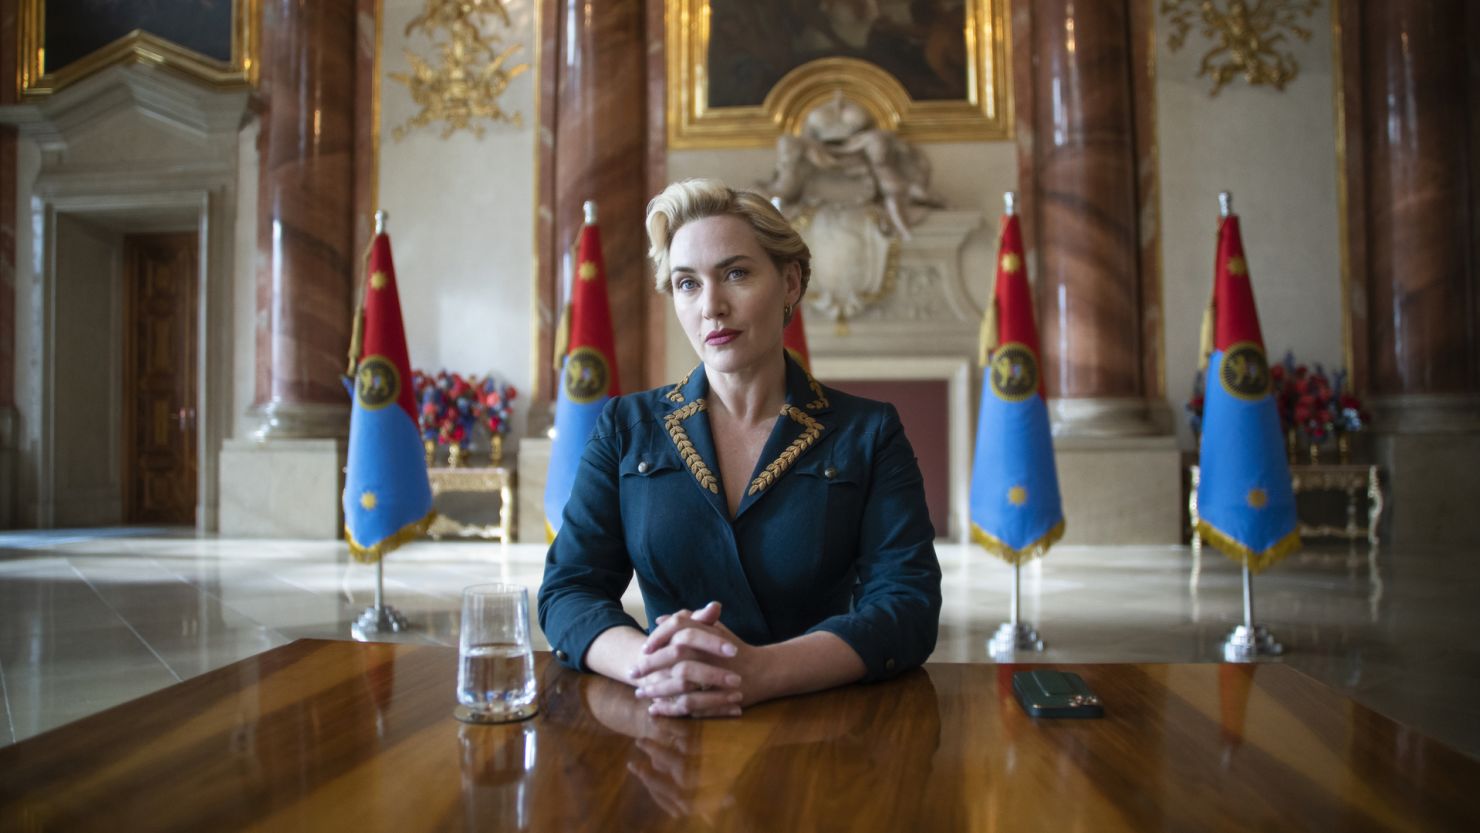 Kate Winslet plays an autocratic leader in HBO's "The Regime."